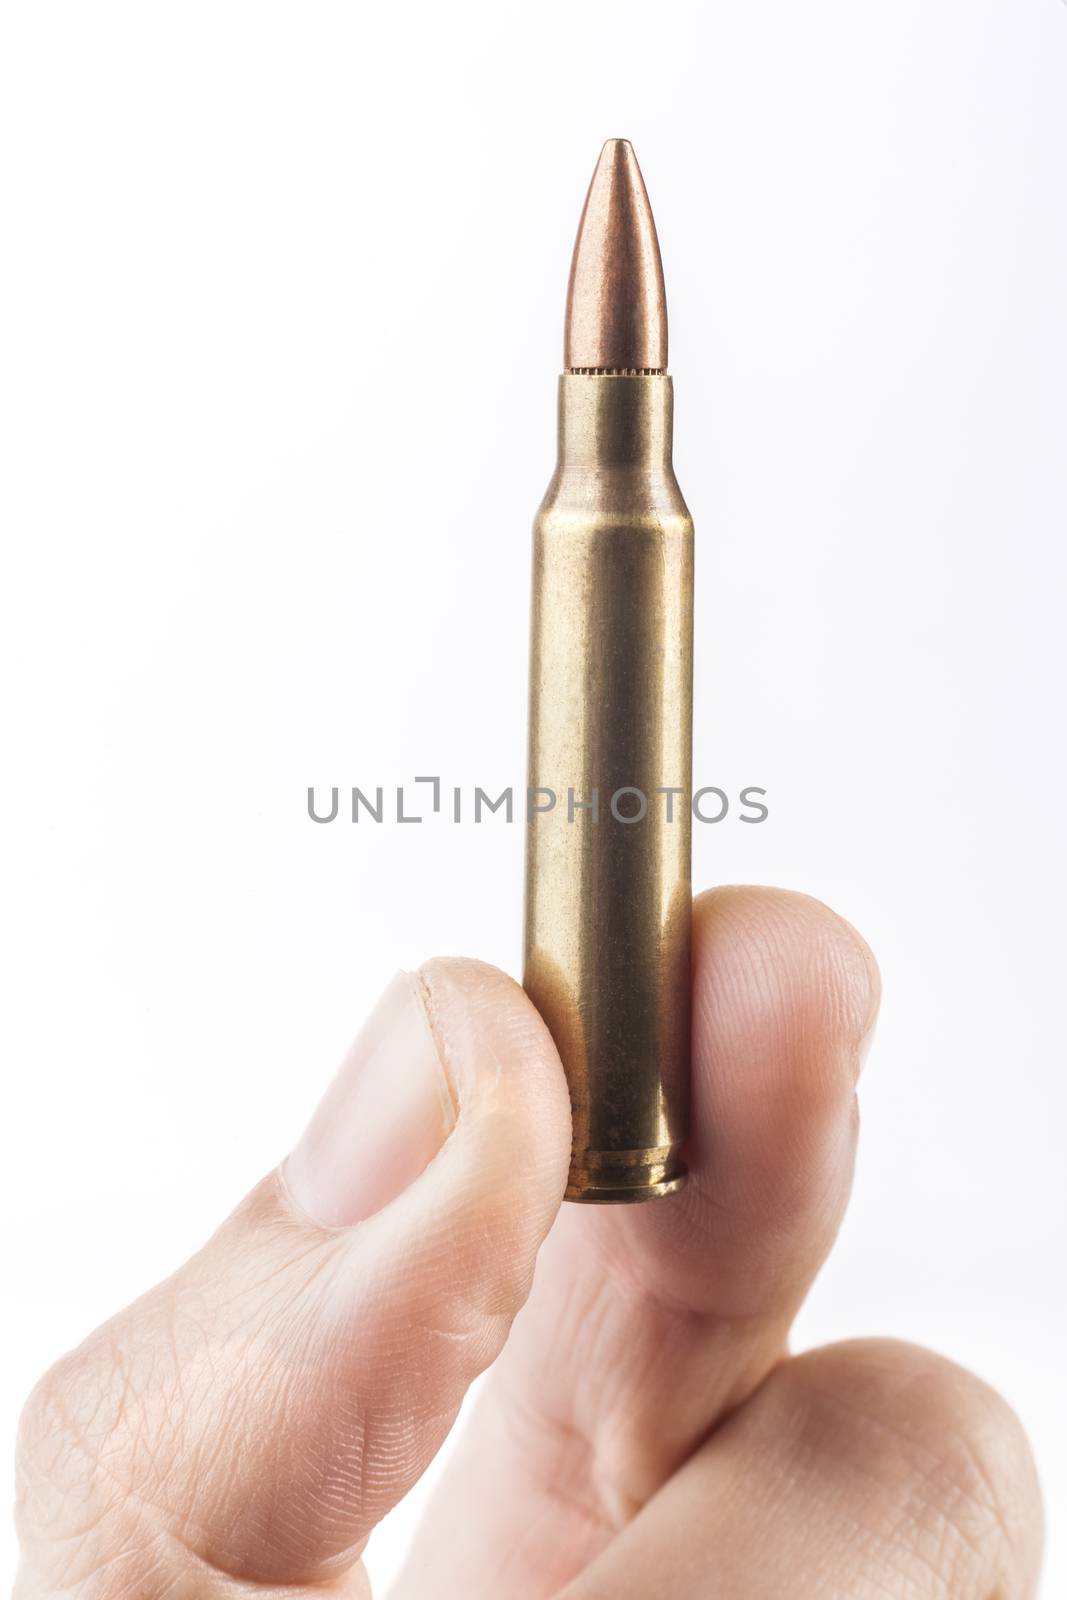 Finger Holding Up Bullet by orcearo